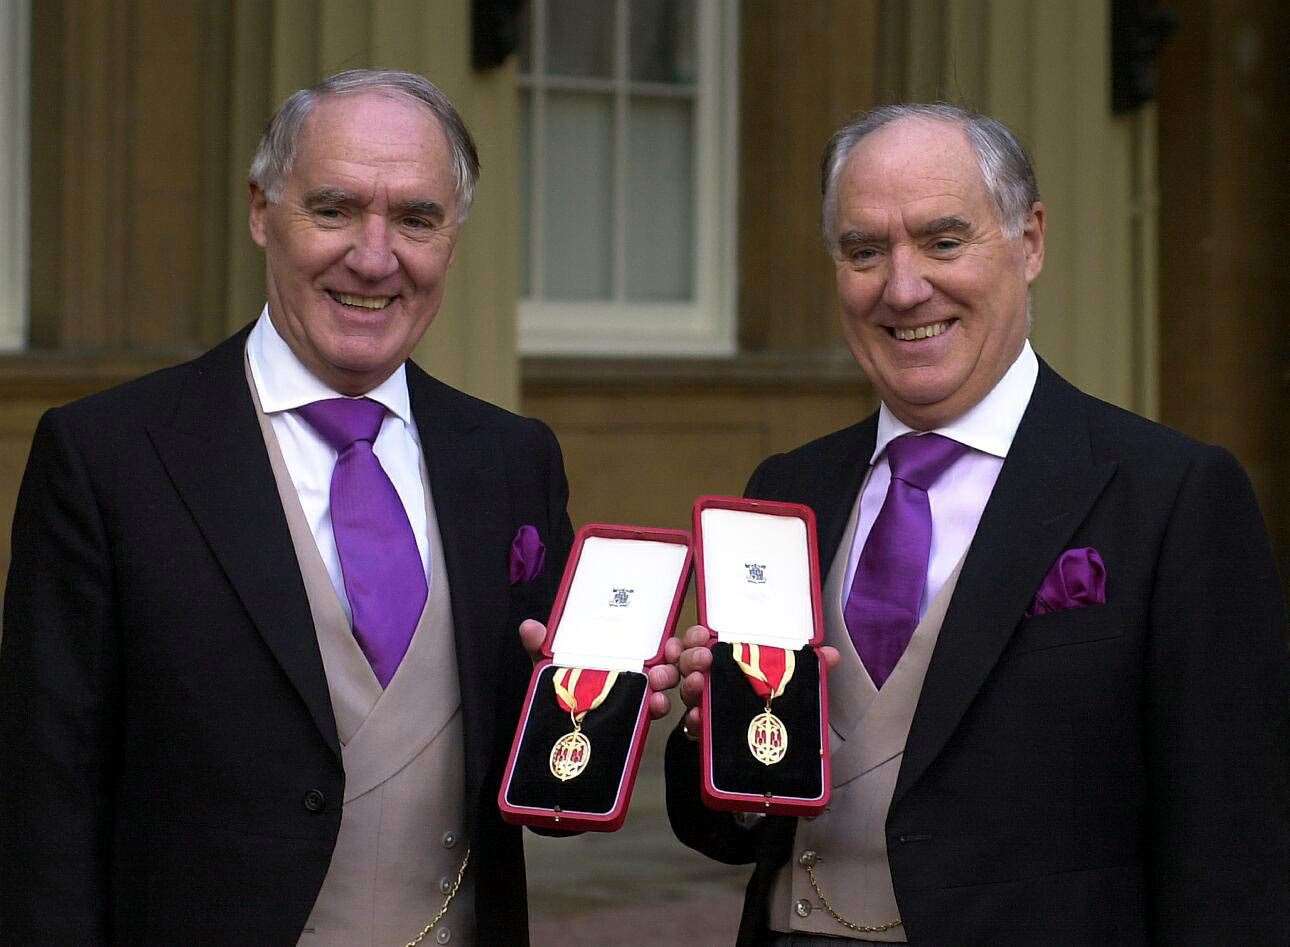 Sir David and Sir Frederick receiving their knighthoods at Buckingham Palace (Michael Stephens/PA)